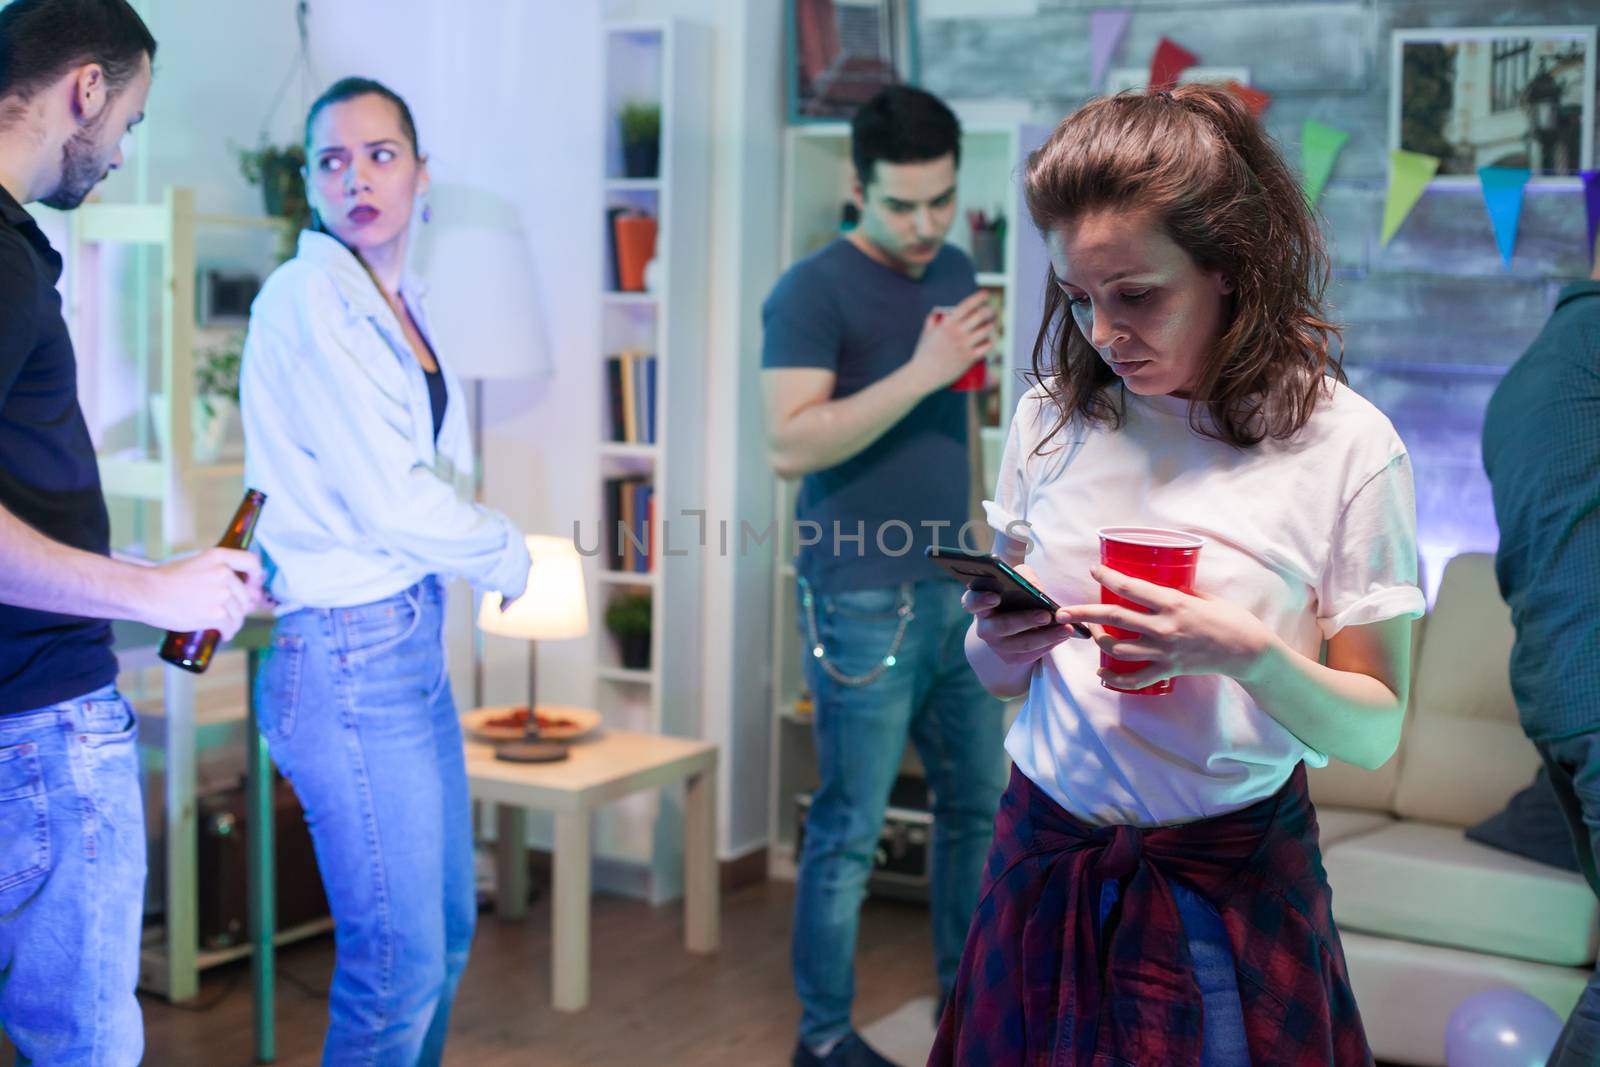 Attractive young woman using smartphone while her friends are dancing in the background.